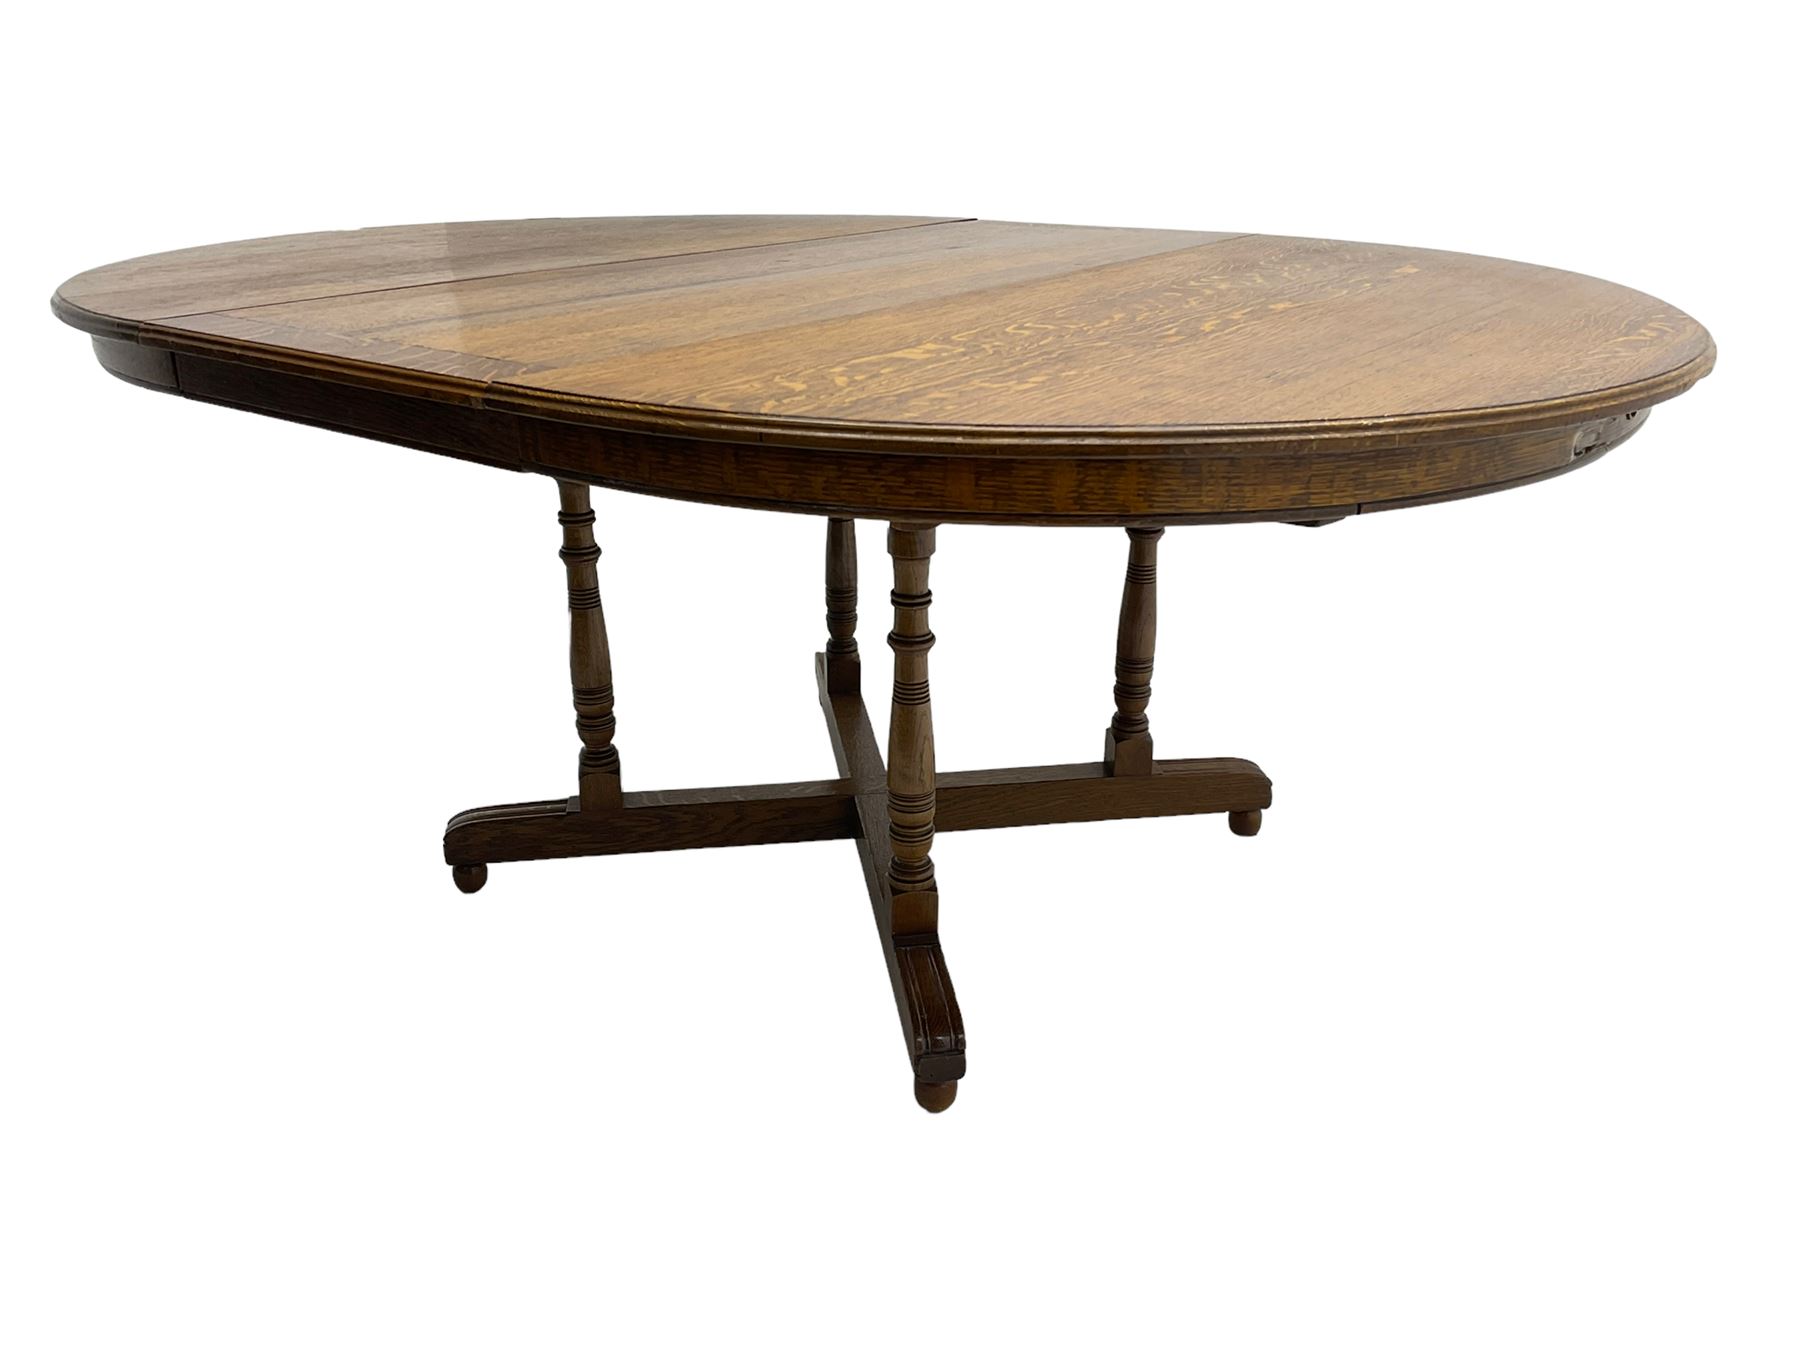 Early 20th century oak dining table